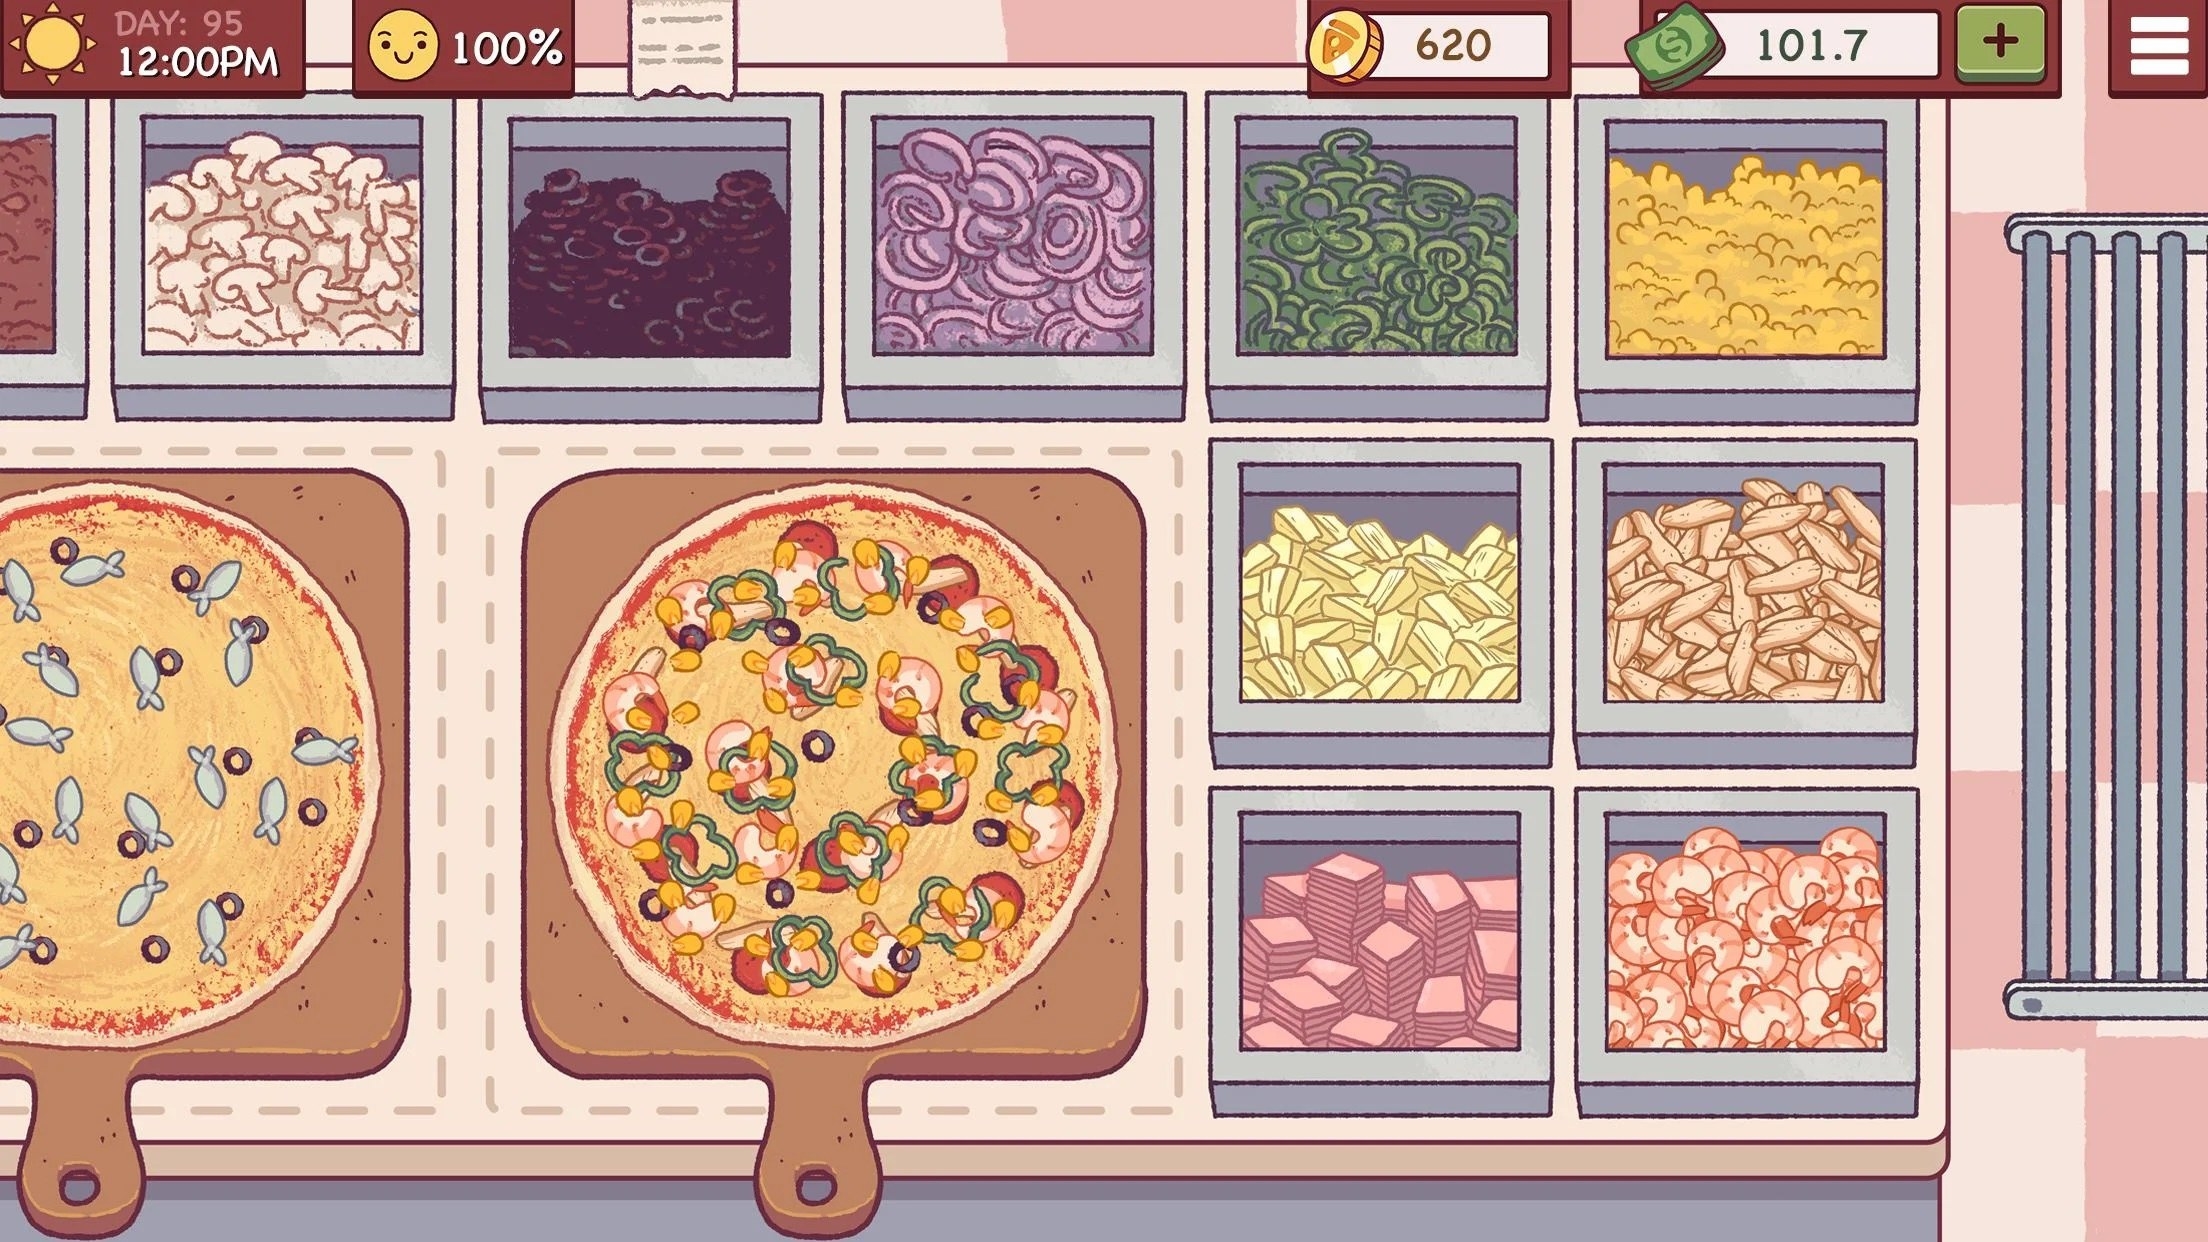 a screenshot of making a pizza in the game